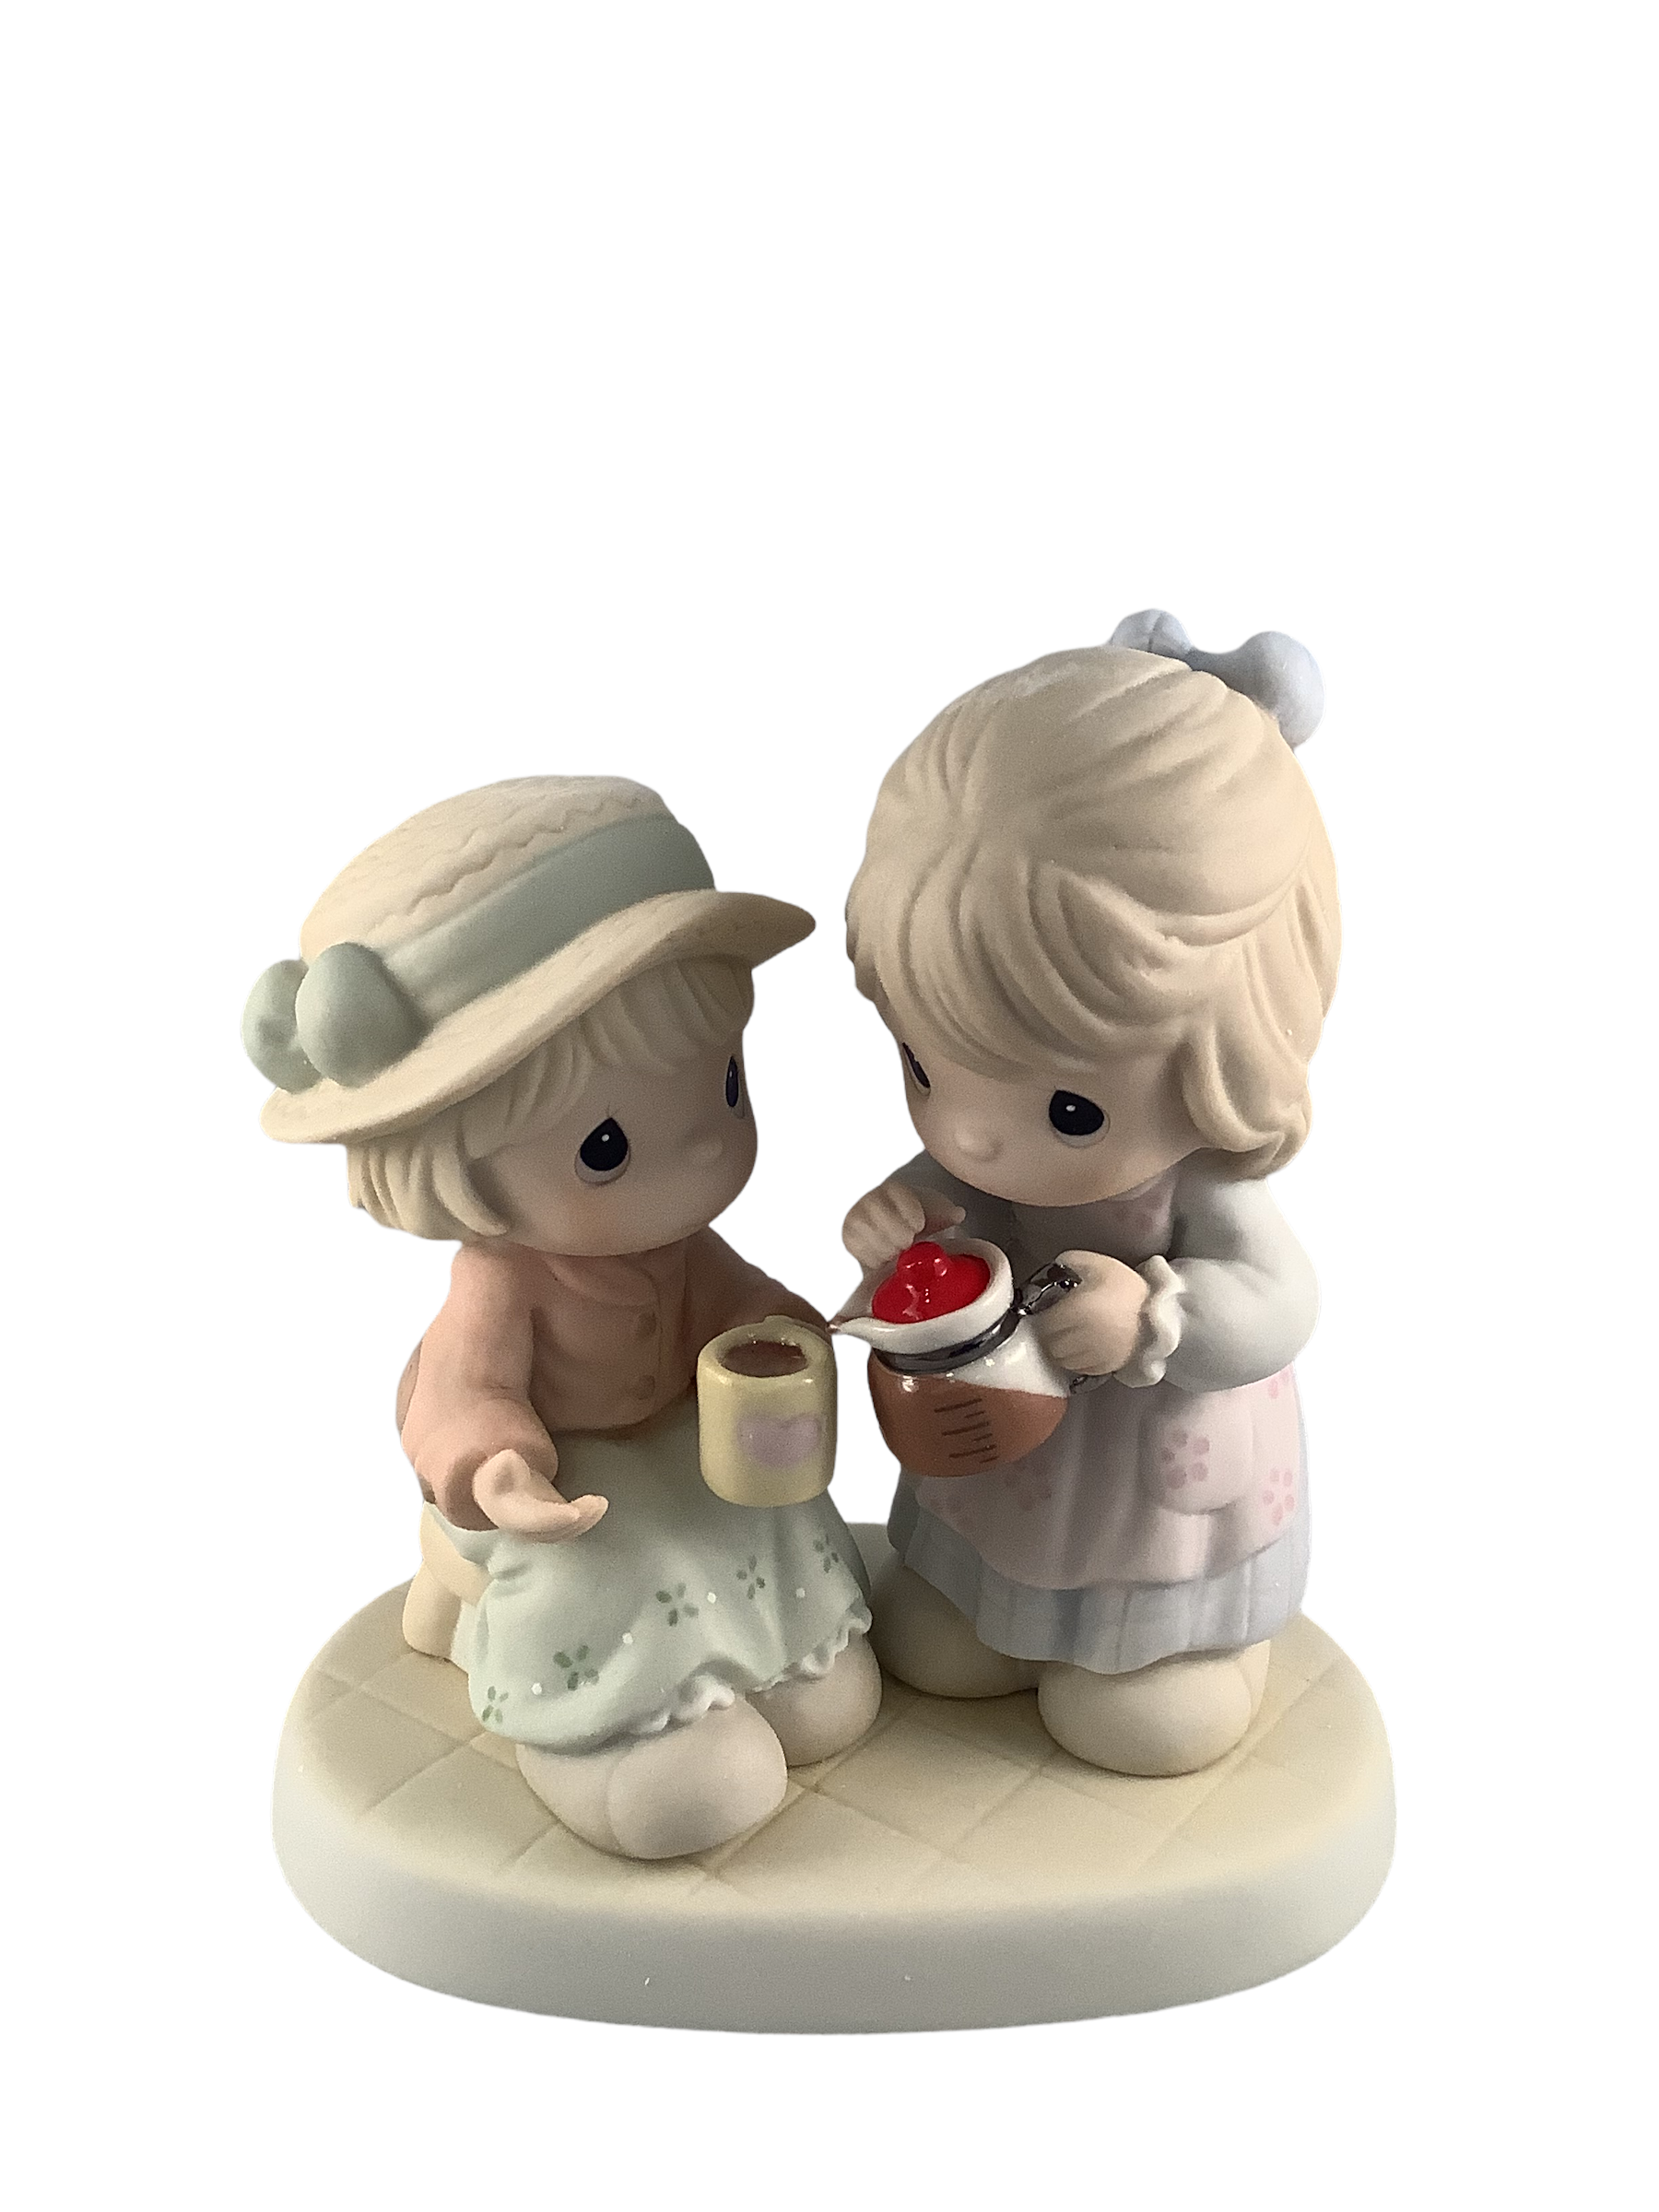 Grounds For A Great Friendship - Precious Moment Figurine